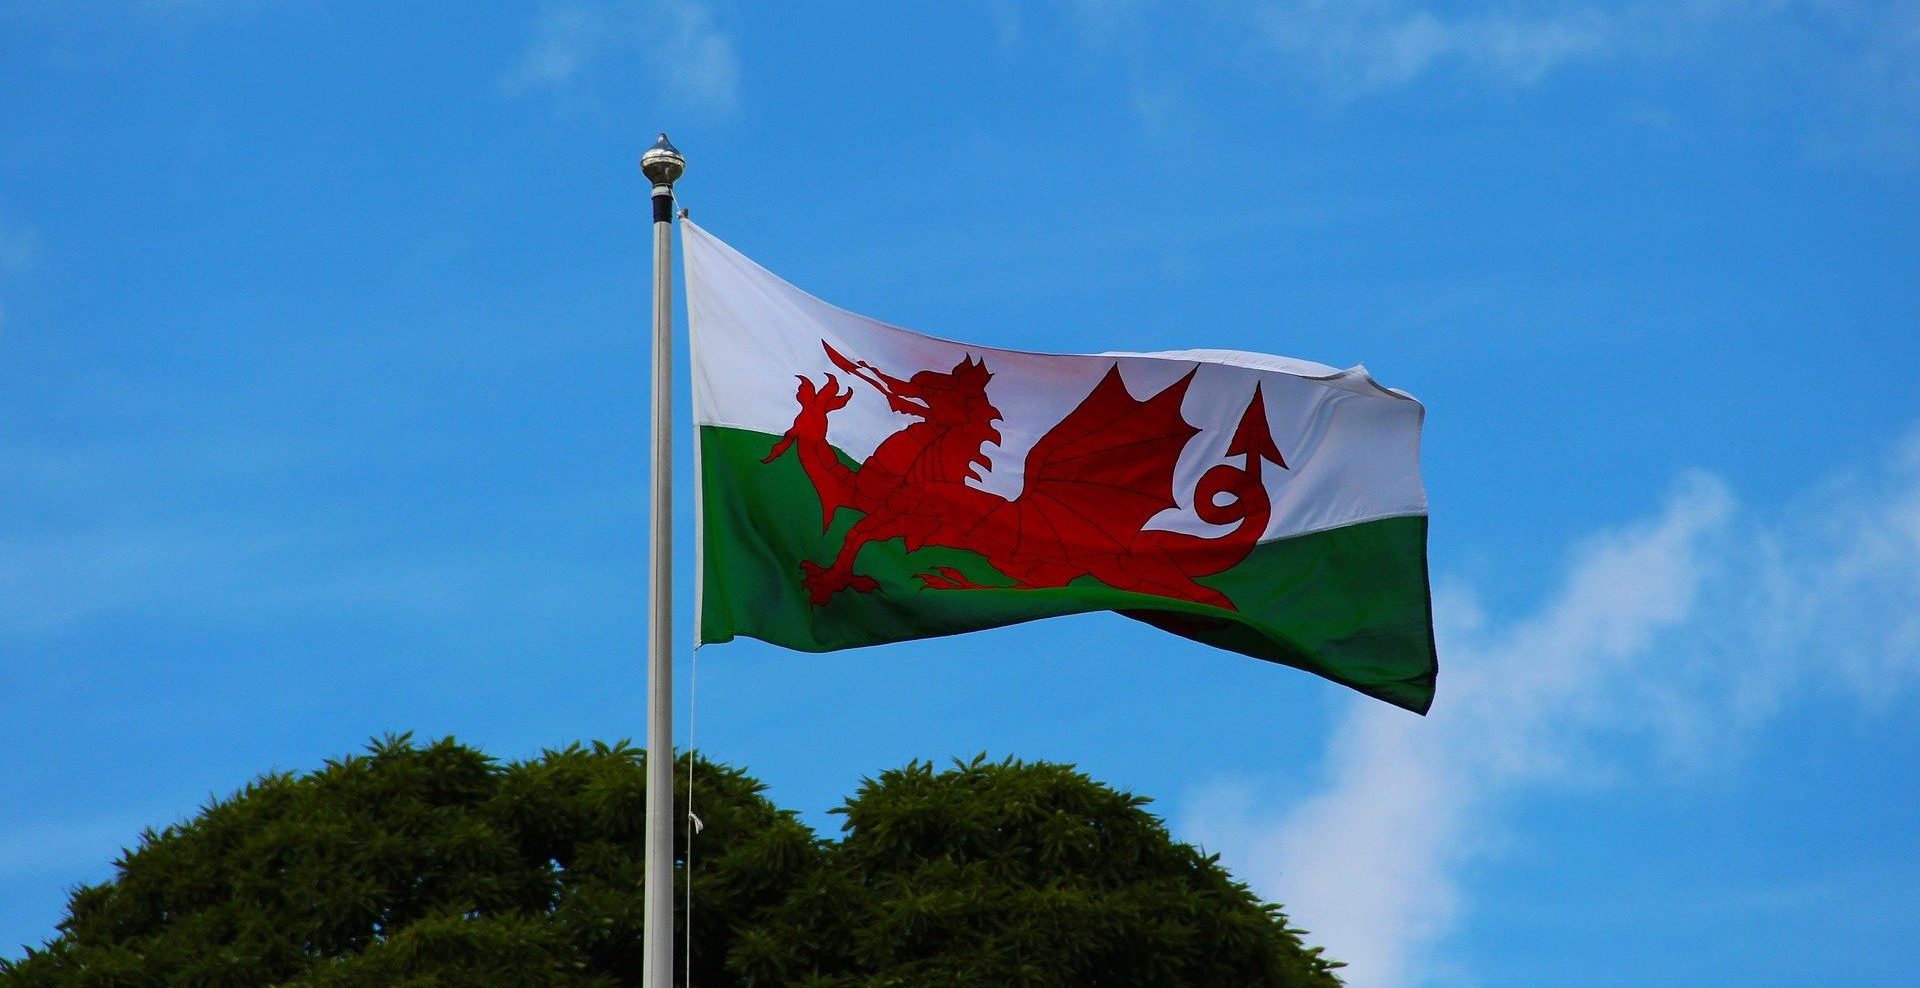 Idox Group News - Welsh Government Launches Grants to Support Business and Research Links with EU